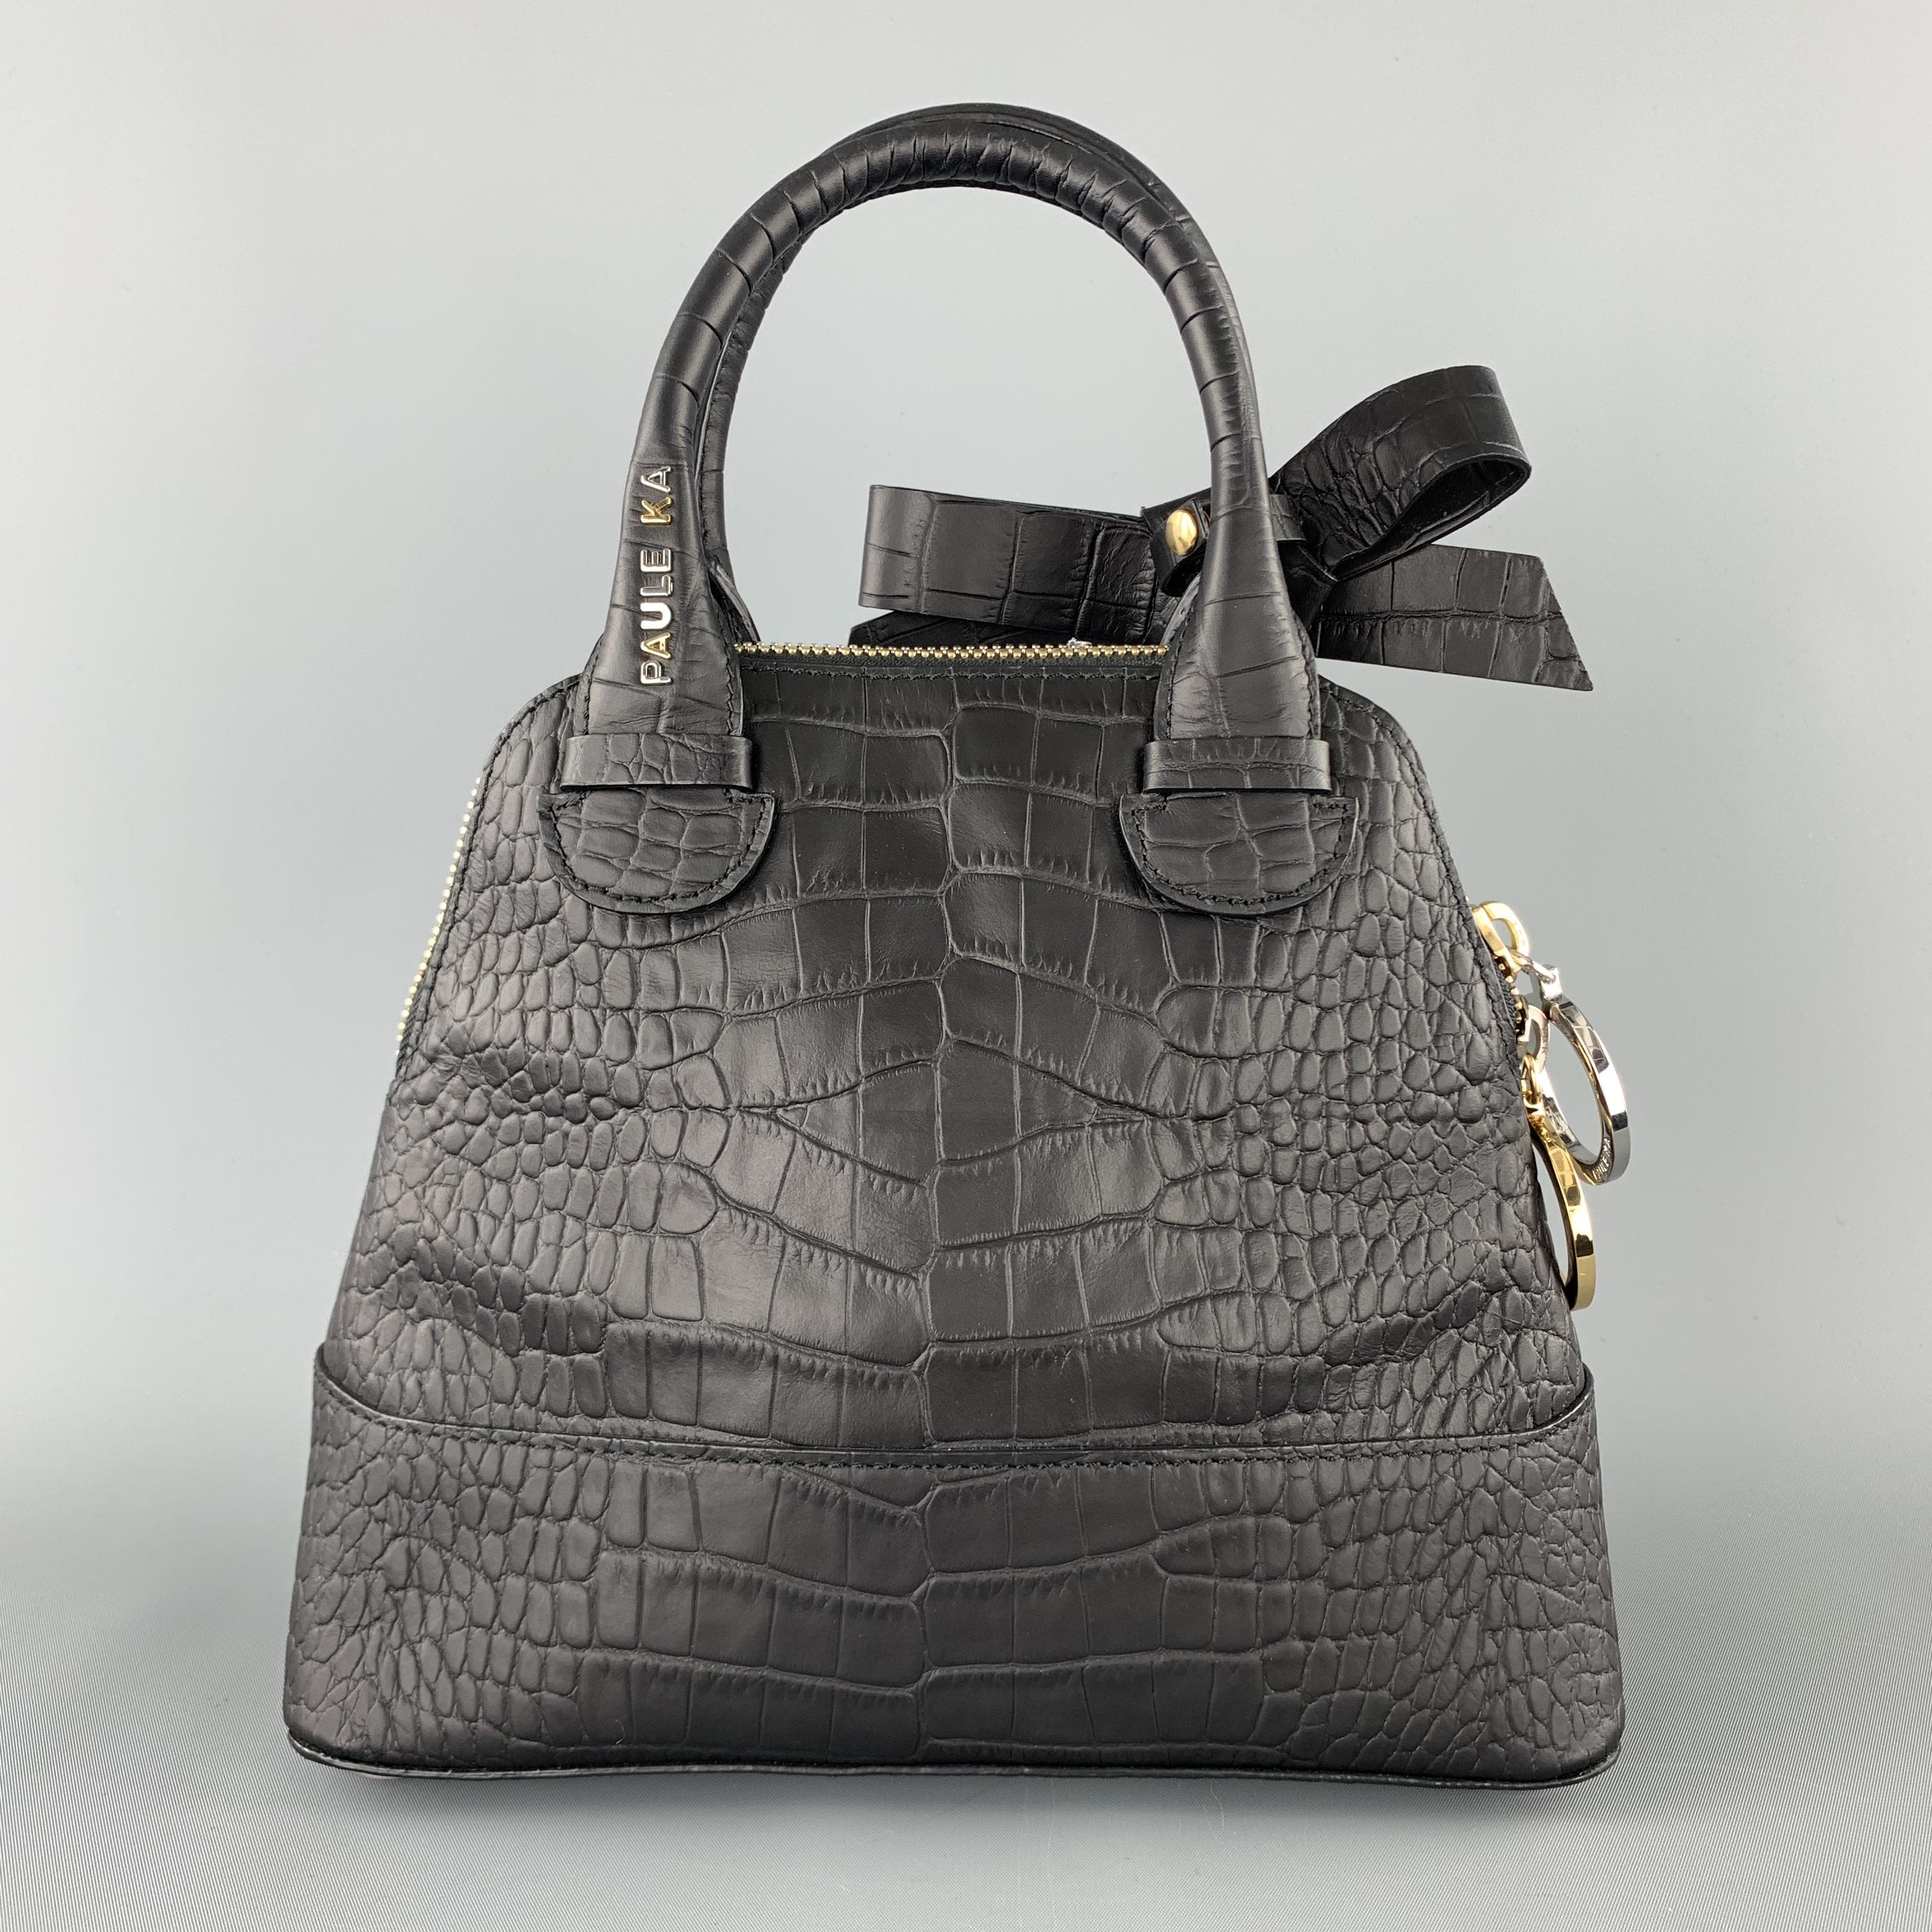 PAUL KA handbag comes in crocodile embossed leather with a double rolled top handle, dual tone zip closure, and snap bow accent. 
 

Excellent Pre-Owned Condition.

Measurements:

Length: 10 in.
Width: 3.75 in.
Height: 8 in. 